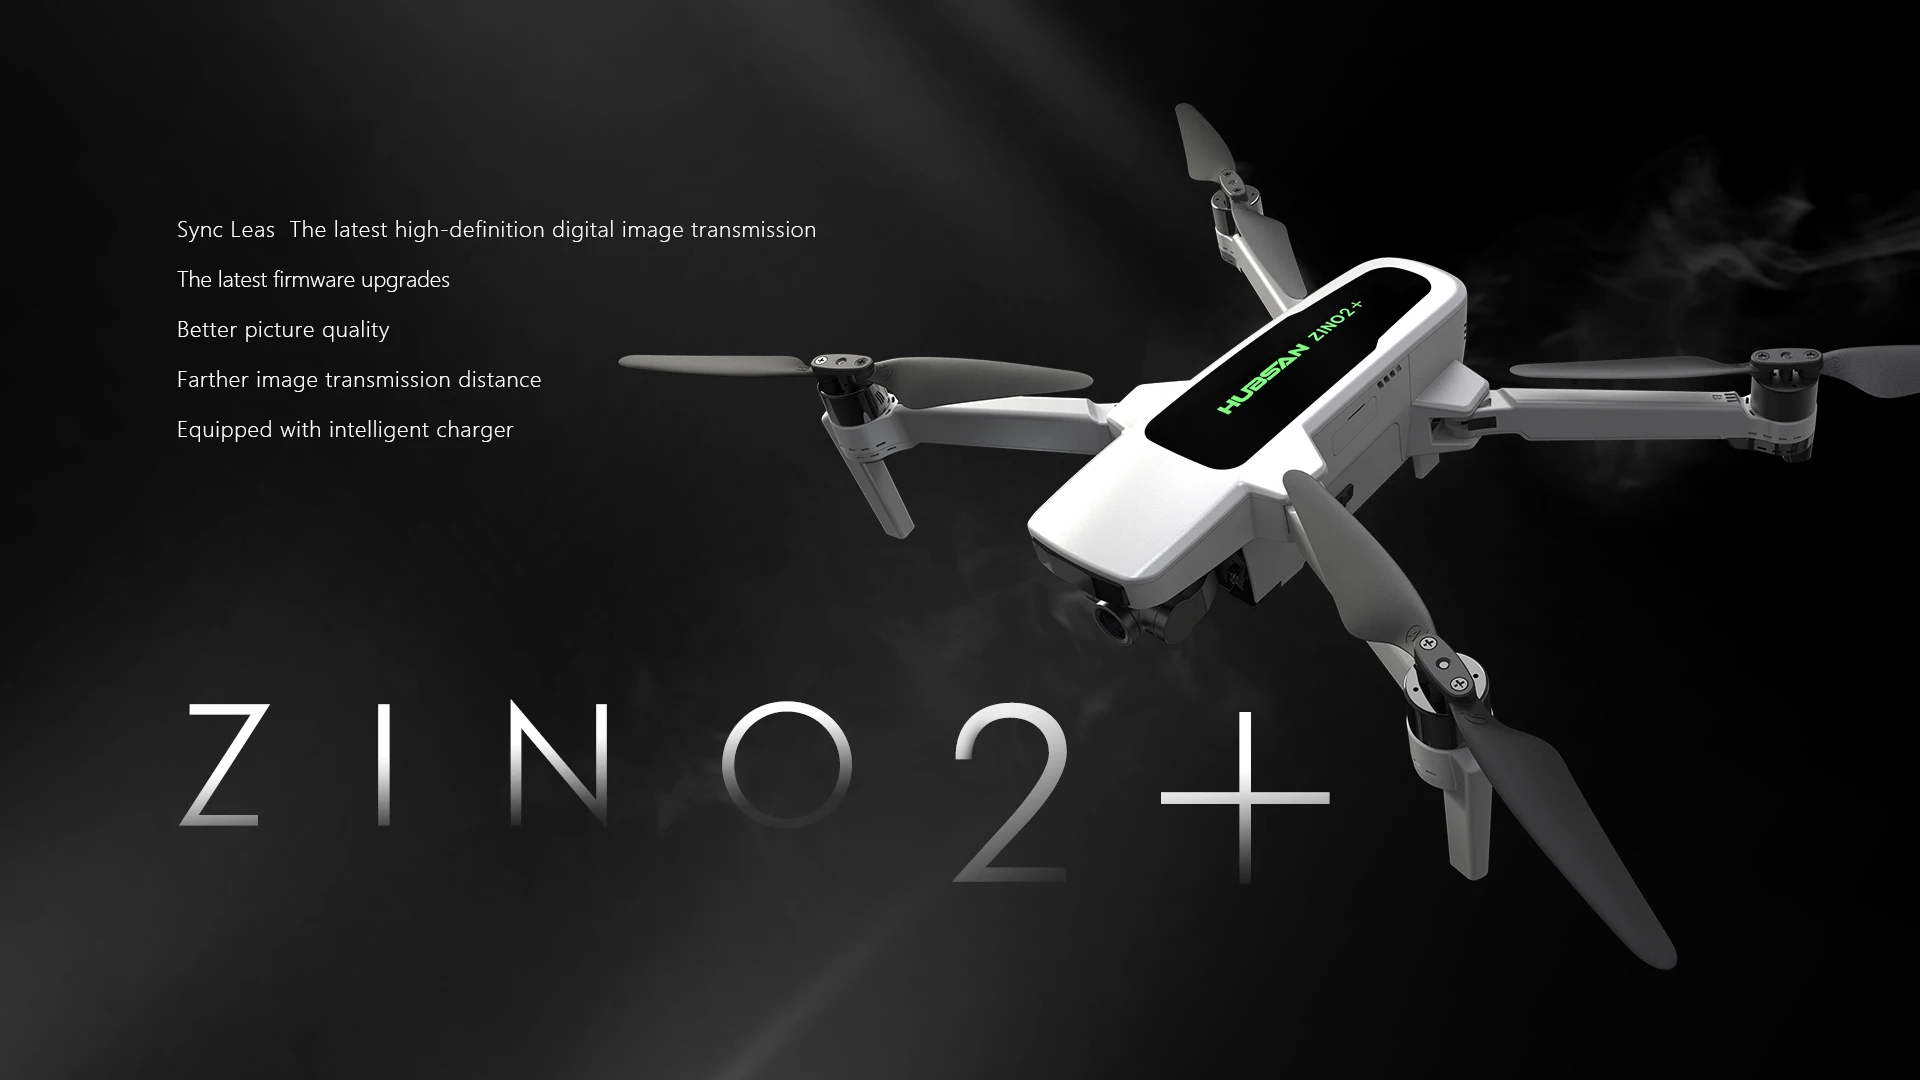 Hubsan Zino 2 Plus Drone, Sync Leas The latest high-definition digital image transmission The latest firmware upgrades